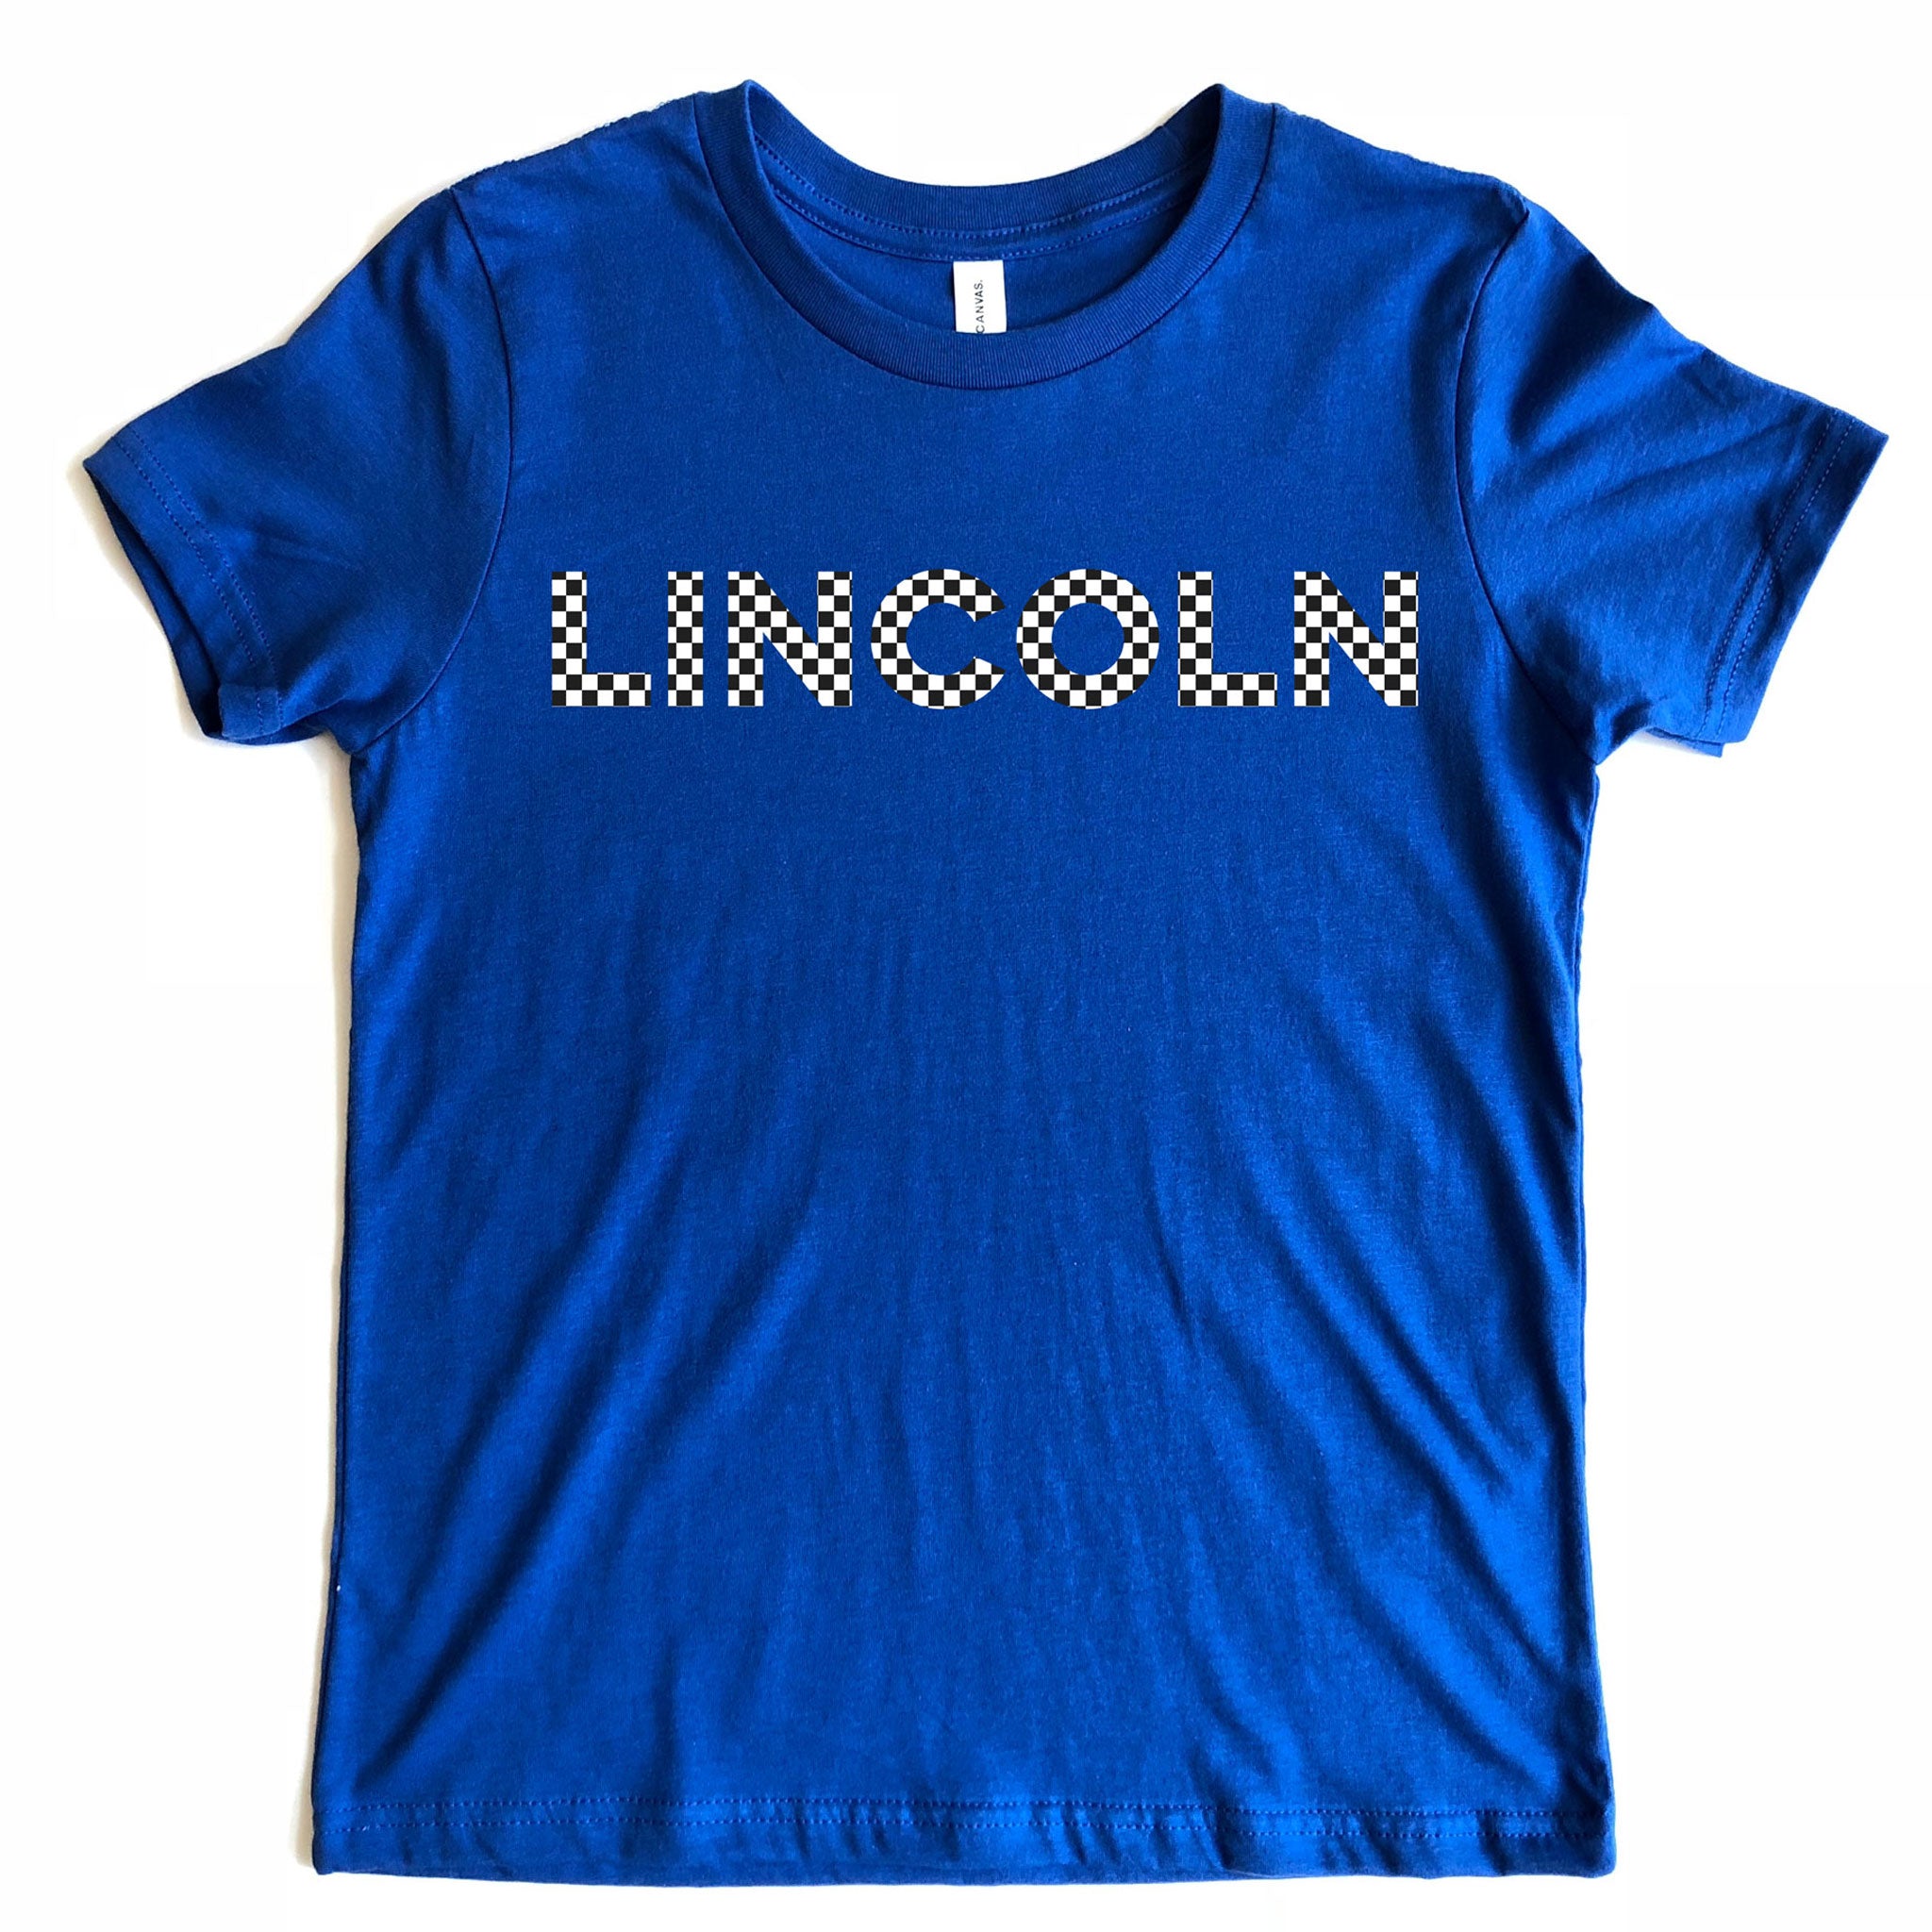 Lincoln Youth Checkered Royal Blue Tee